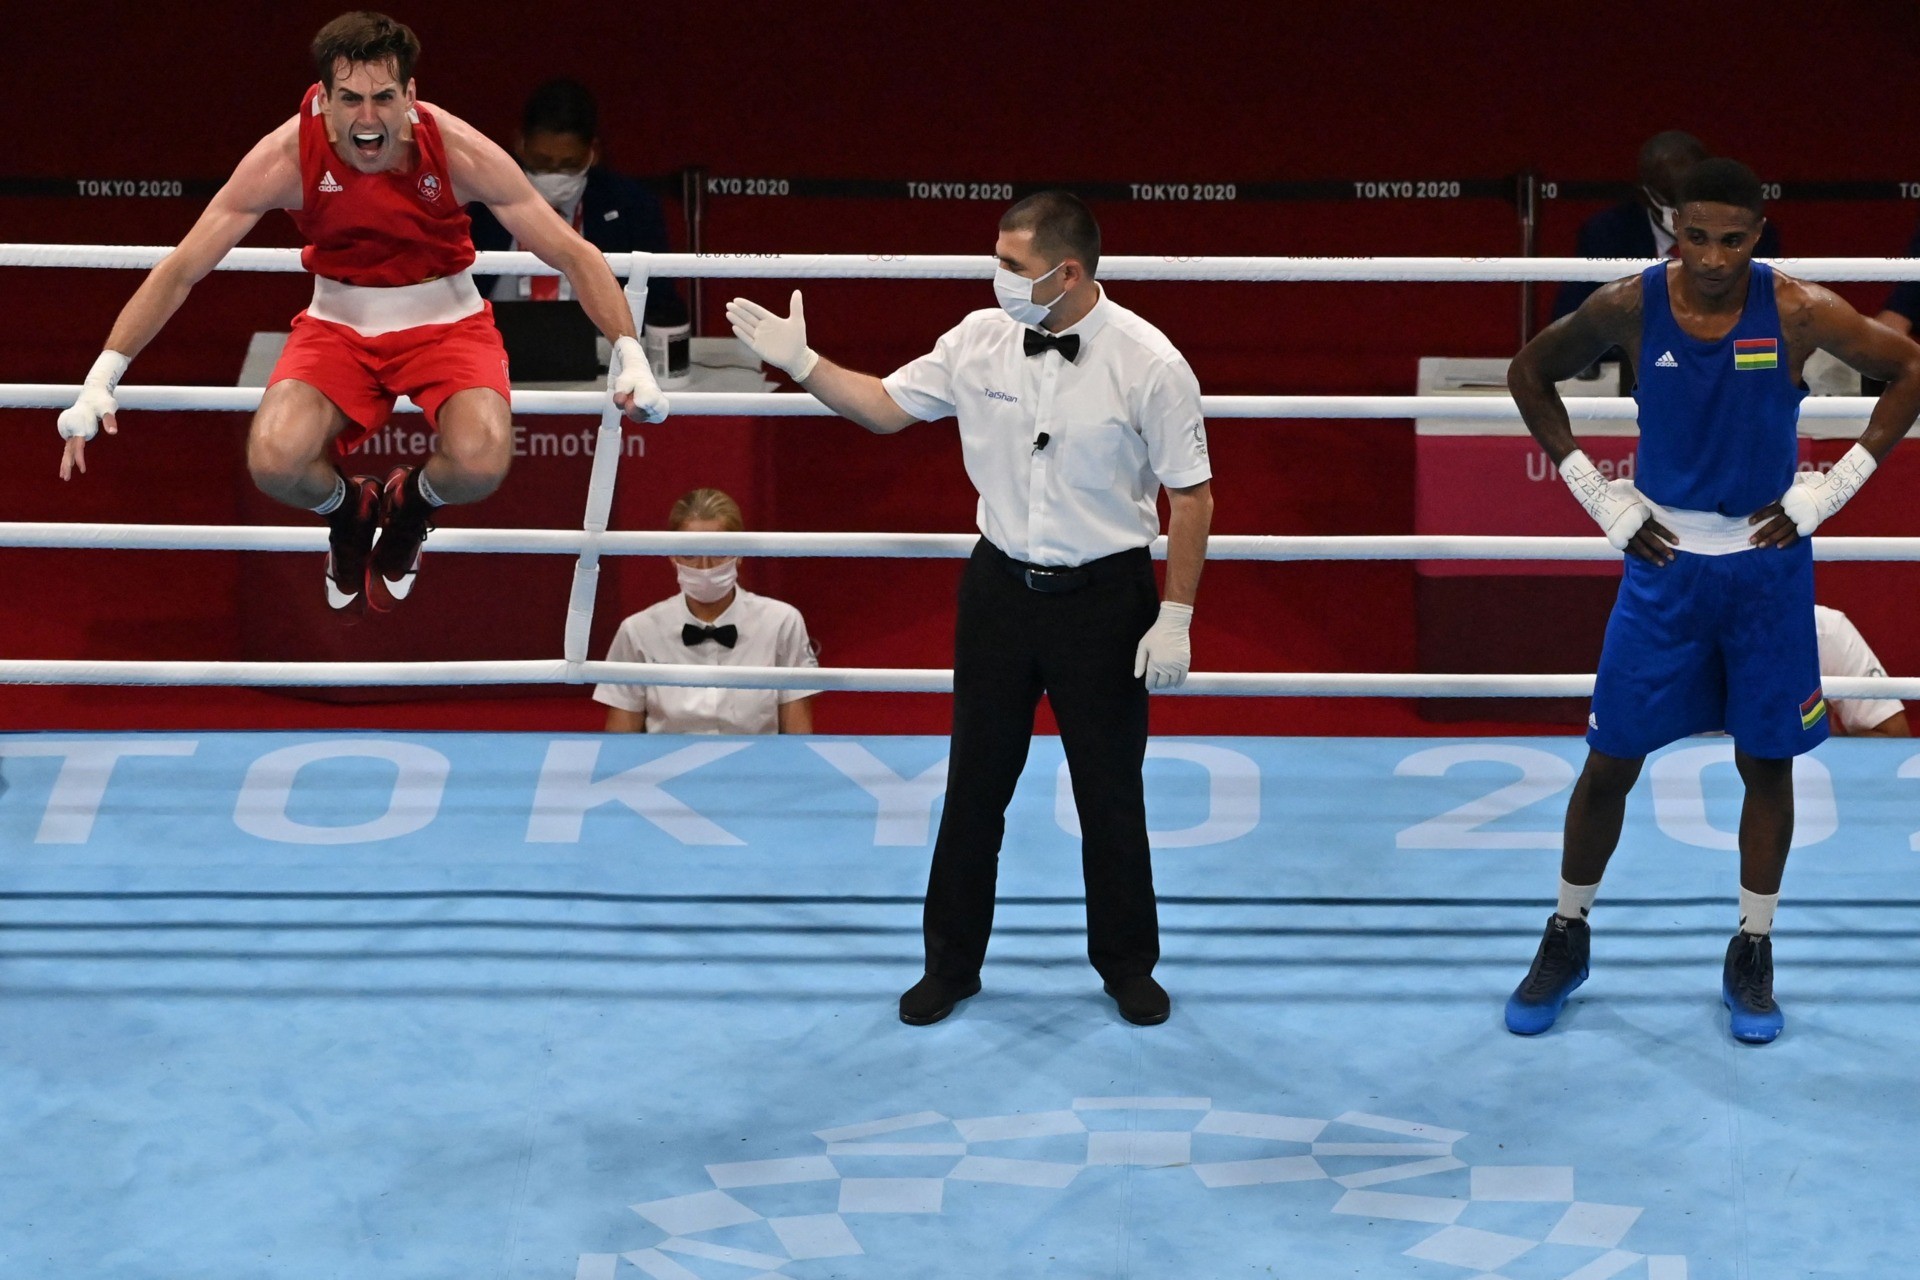 Irish Boxer Out of Olympics After Injuring Ankle While Celebrating Win